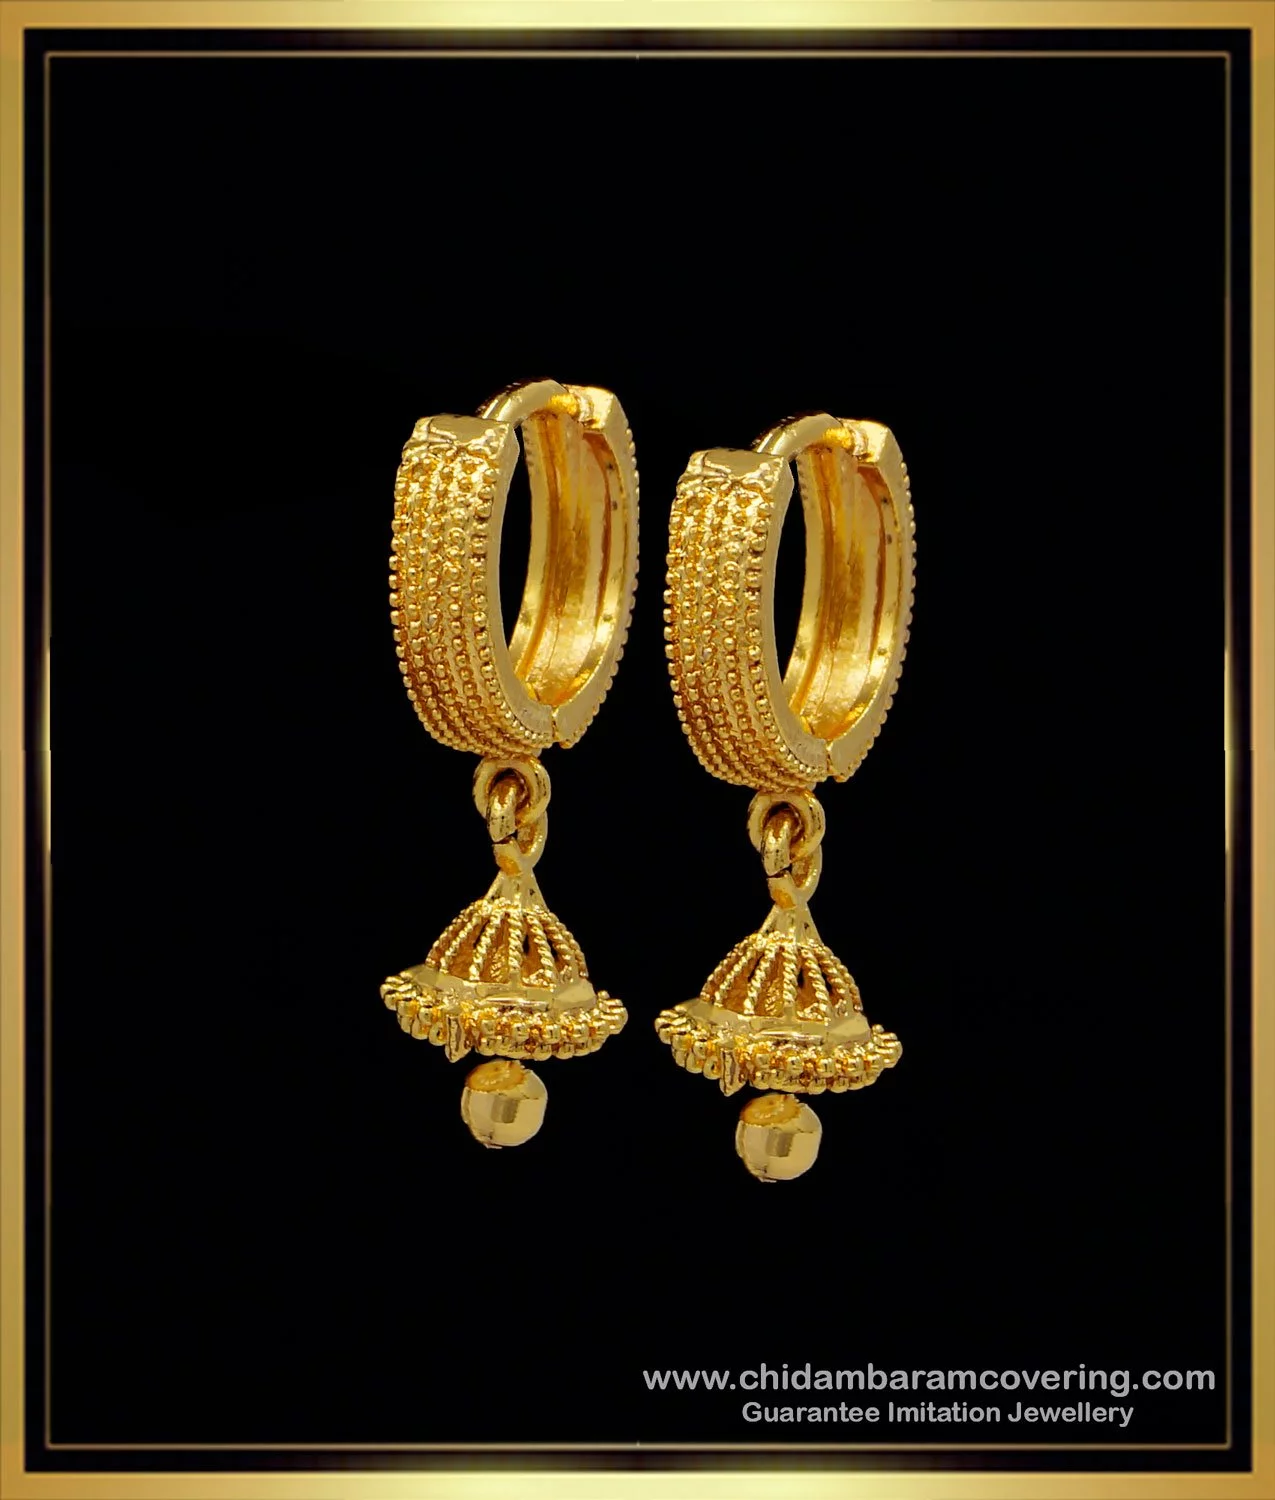 Simple gold earrings designs for daily use | by Priyankaroy08953 | Medium